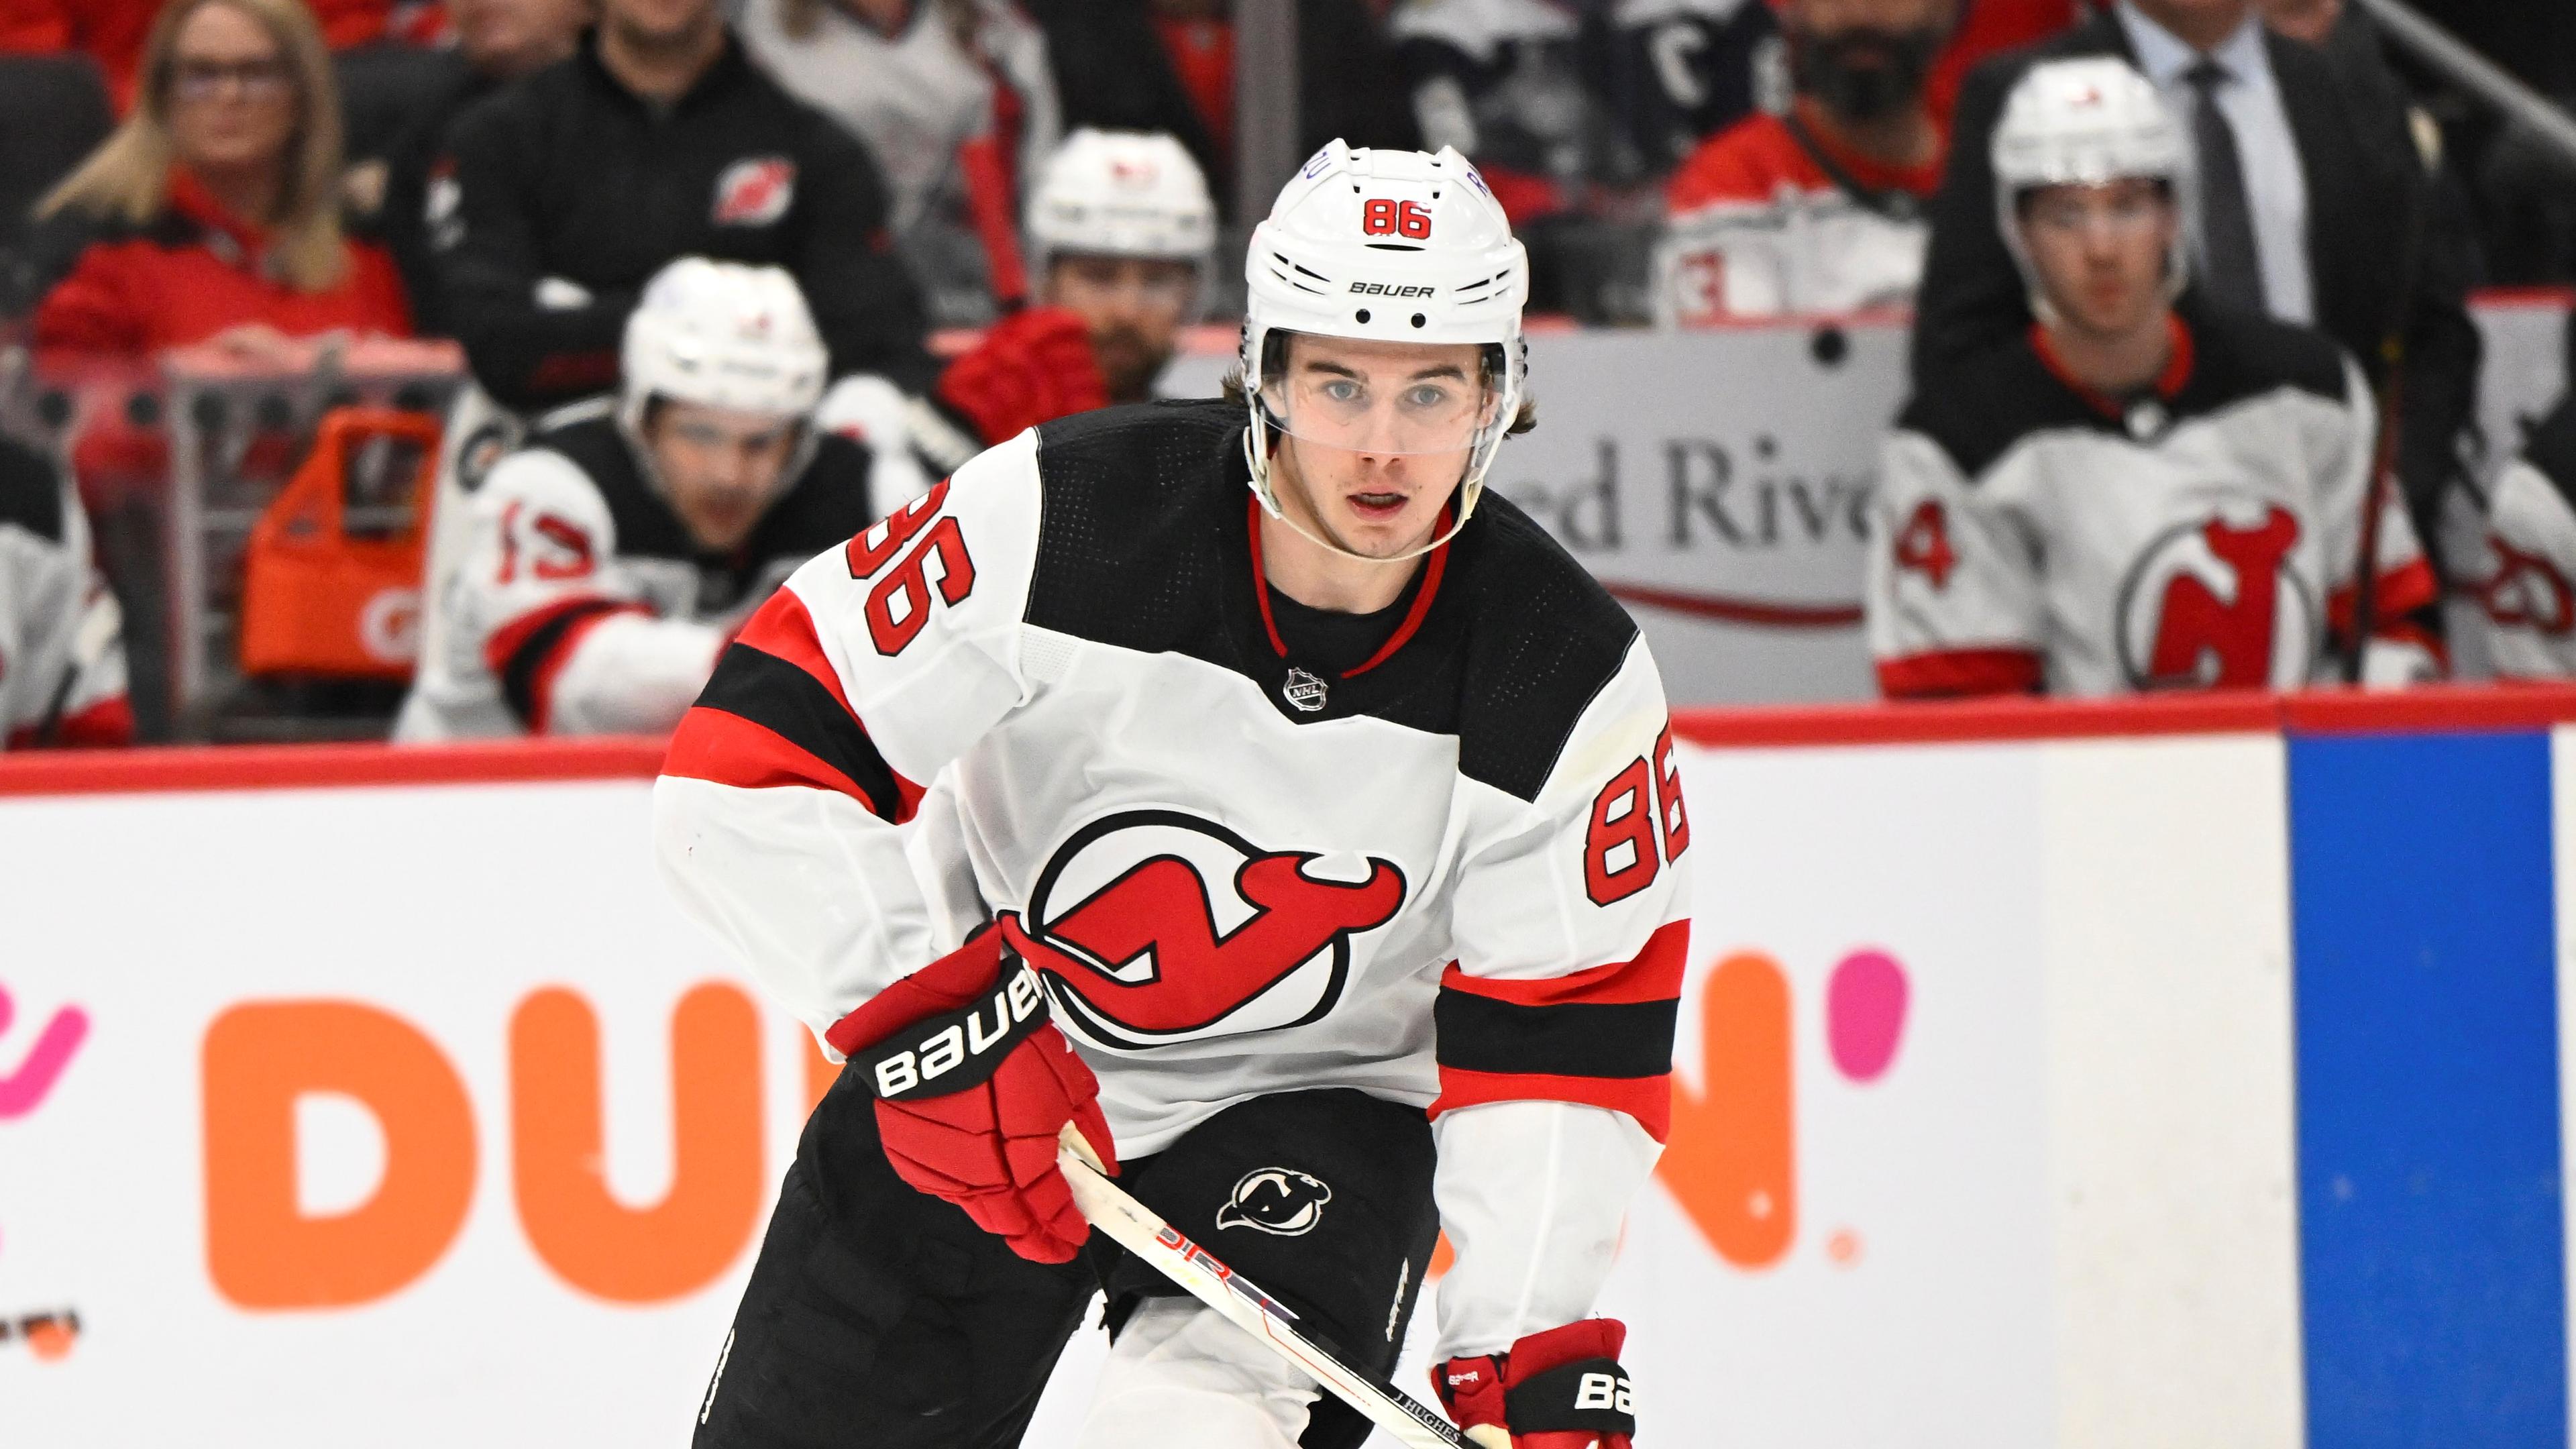 Mar 26, 2022; Washington, District of Columbia, USA; New Jersey Devils center Jack Hughes (86) handles the puck against the Washington Capitals during the second period at Capital One Arena. Mandatory Credit: Brad Mills-USA TODAY Sports / Brad Mills-USA TODAY Sports